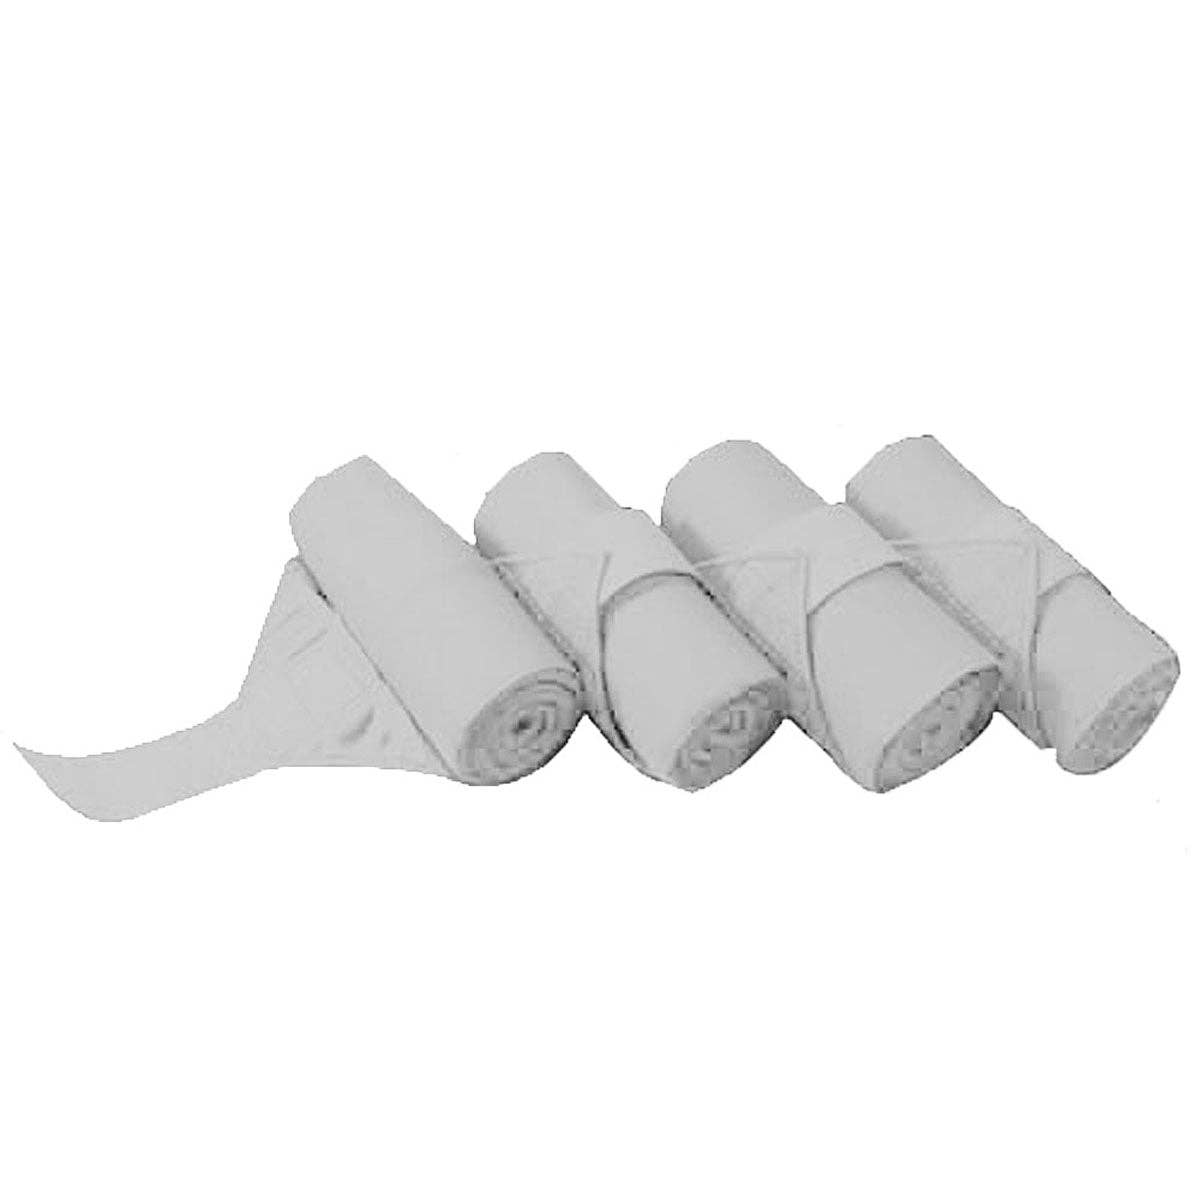 Extra Long Standing Bandages - 6" x 12" Set of 4